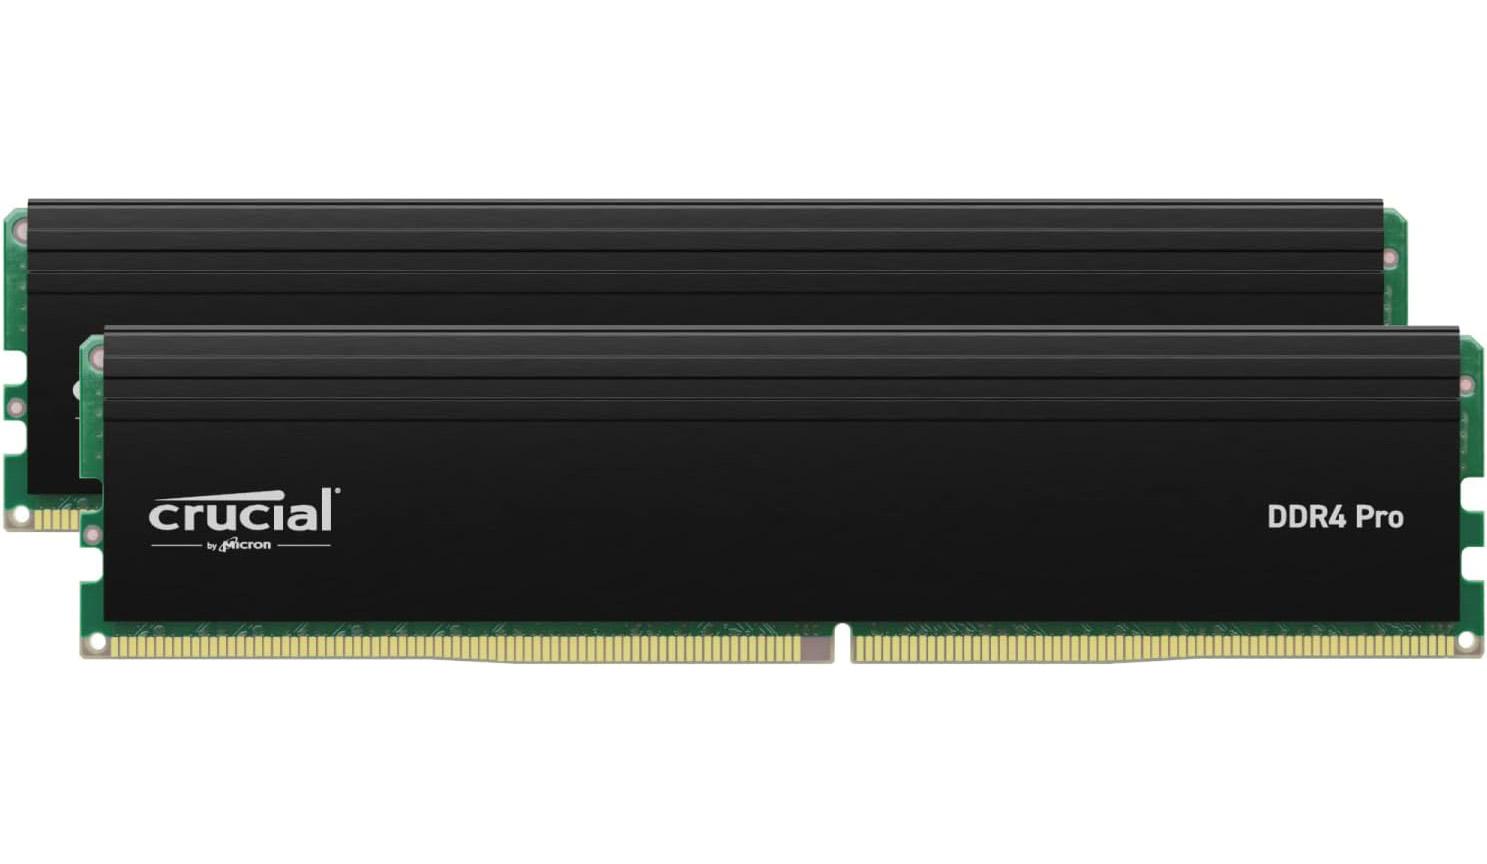 32GB Crucial Pro DDR4 3200MHz Desktop RAM Memory for $56.99 Shipped